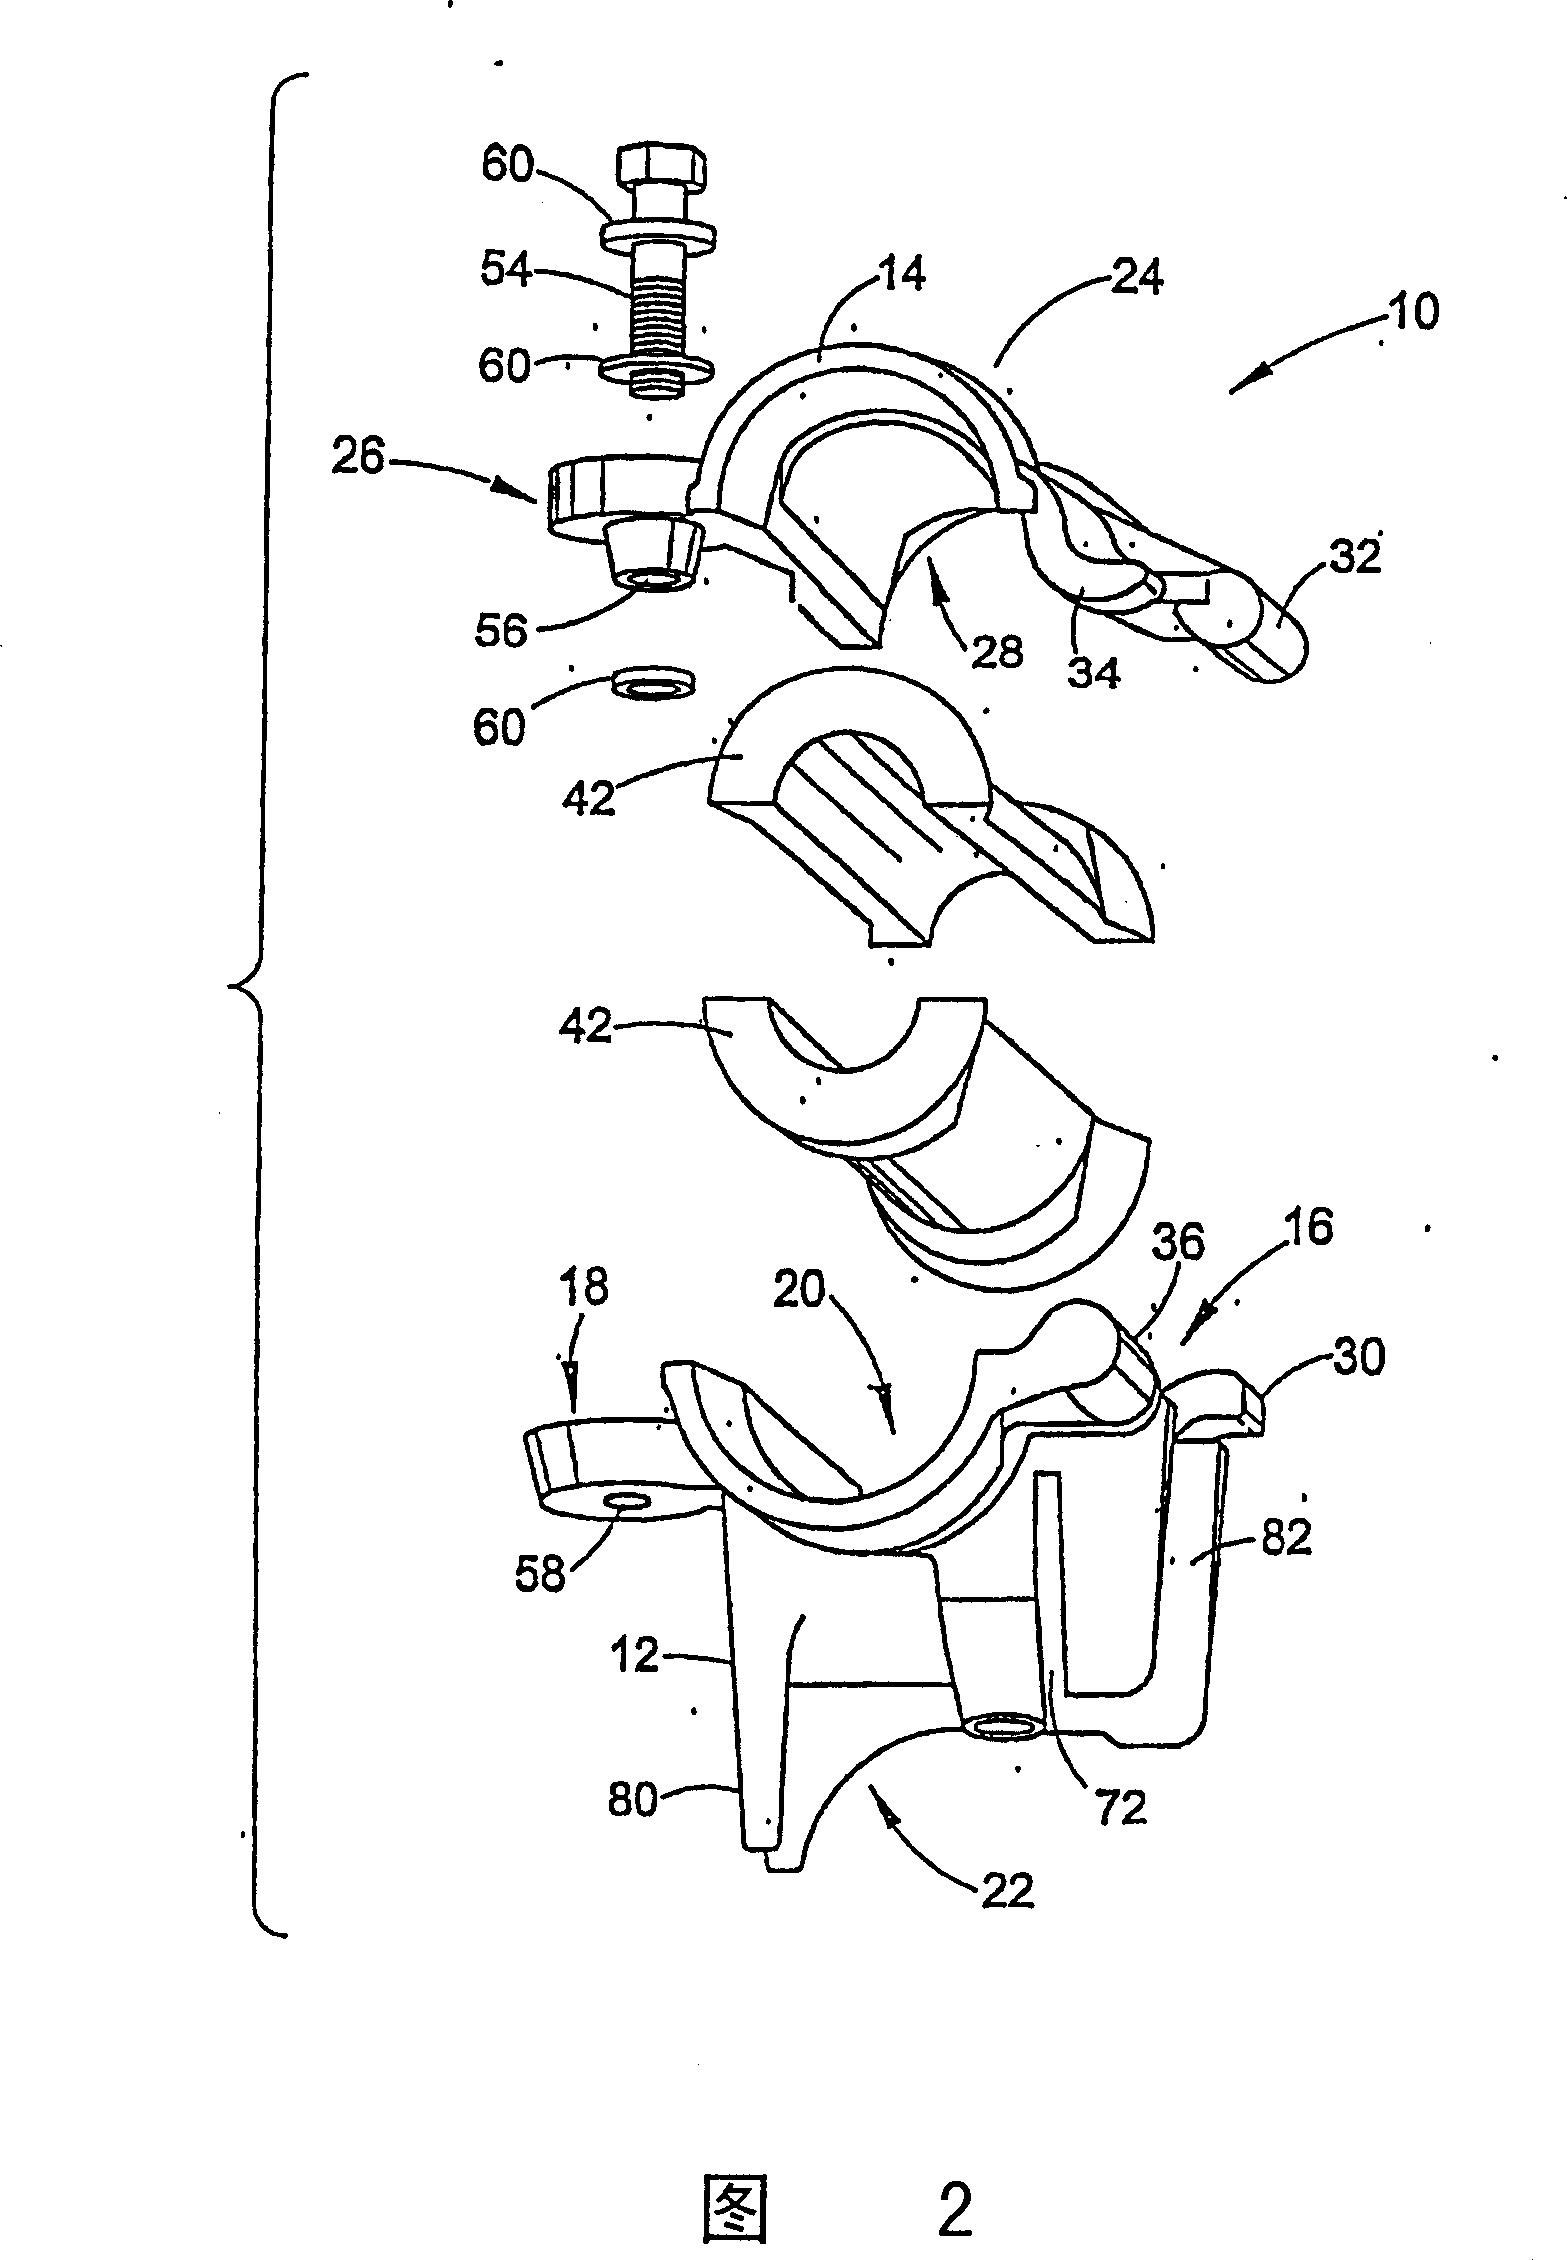 Modular cable support apparatus, method, and system